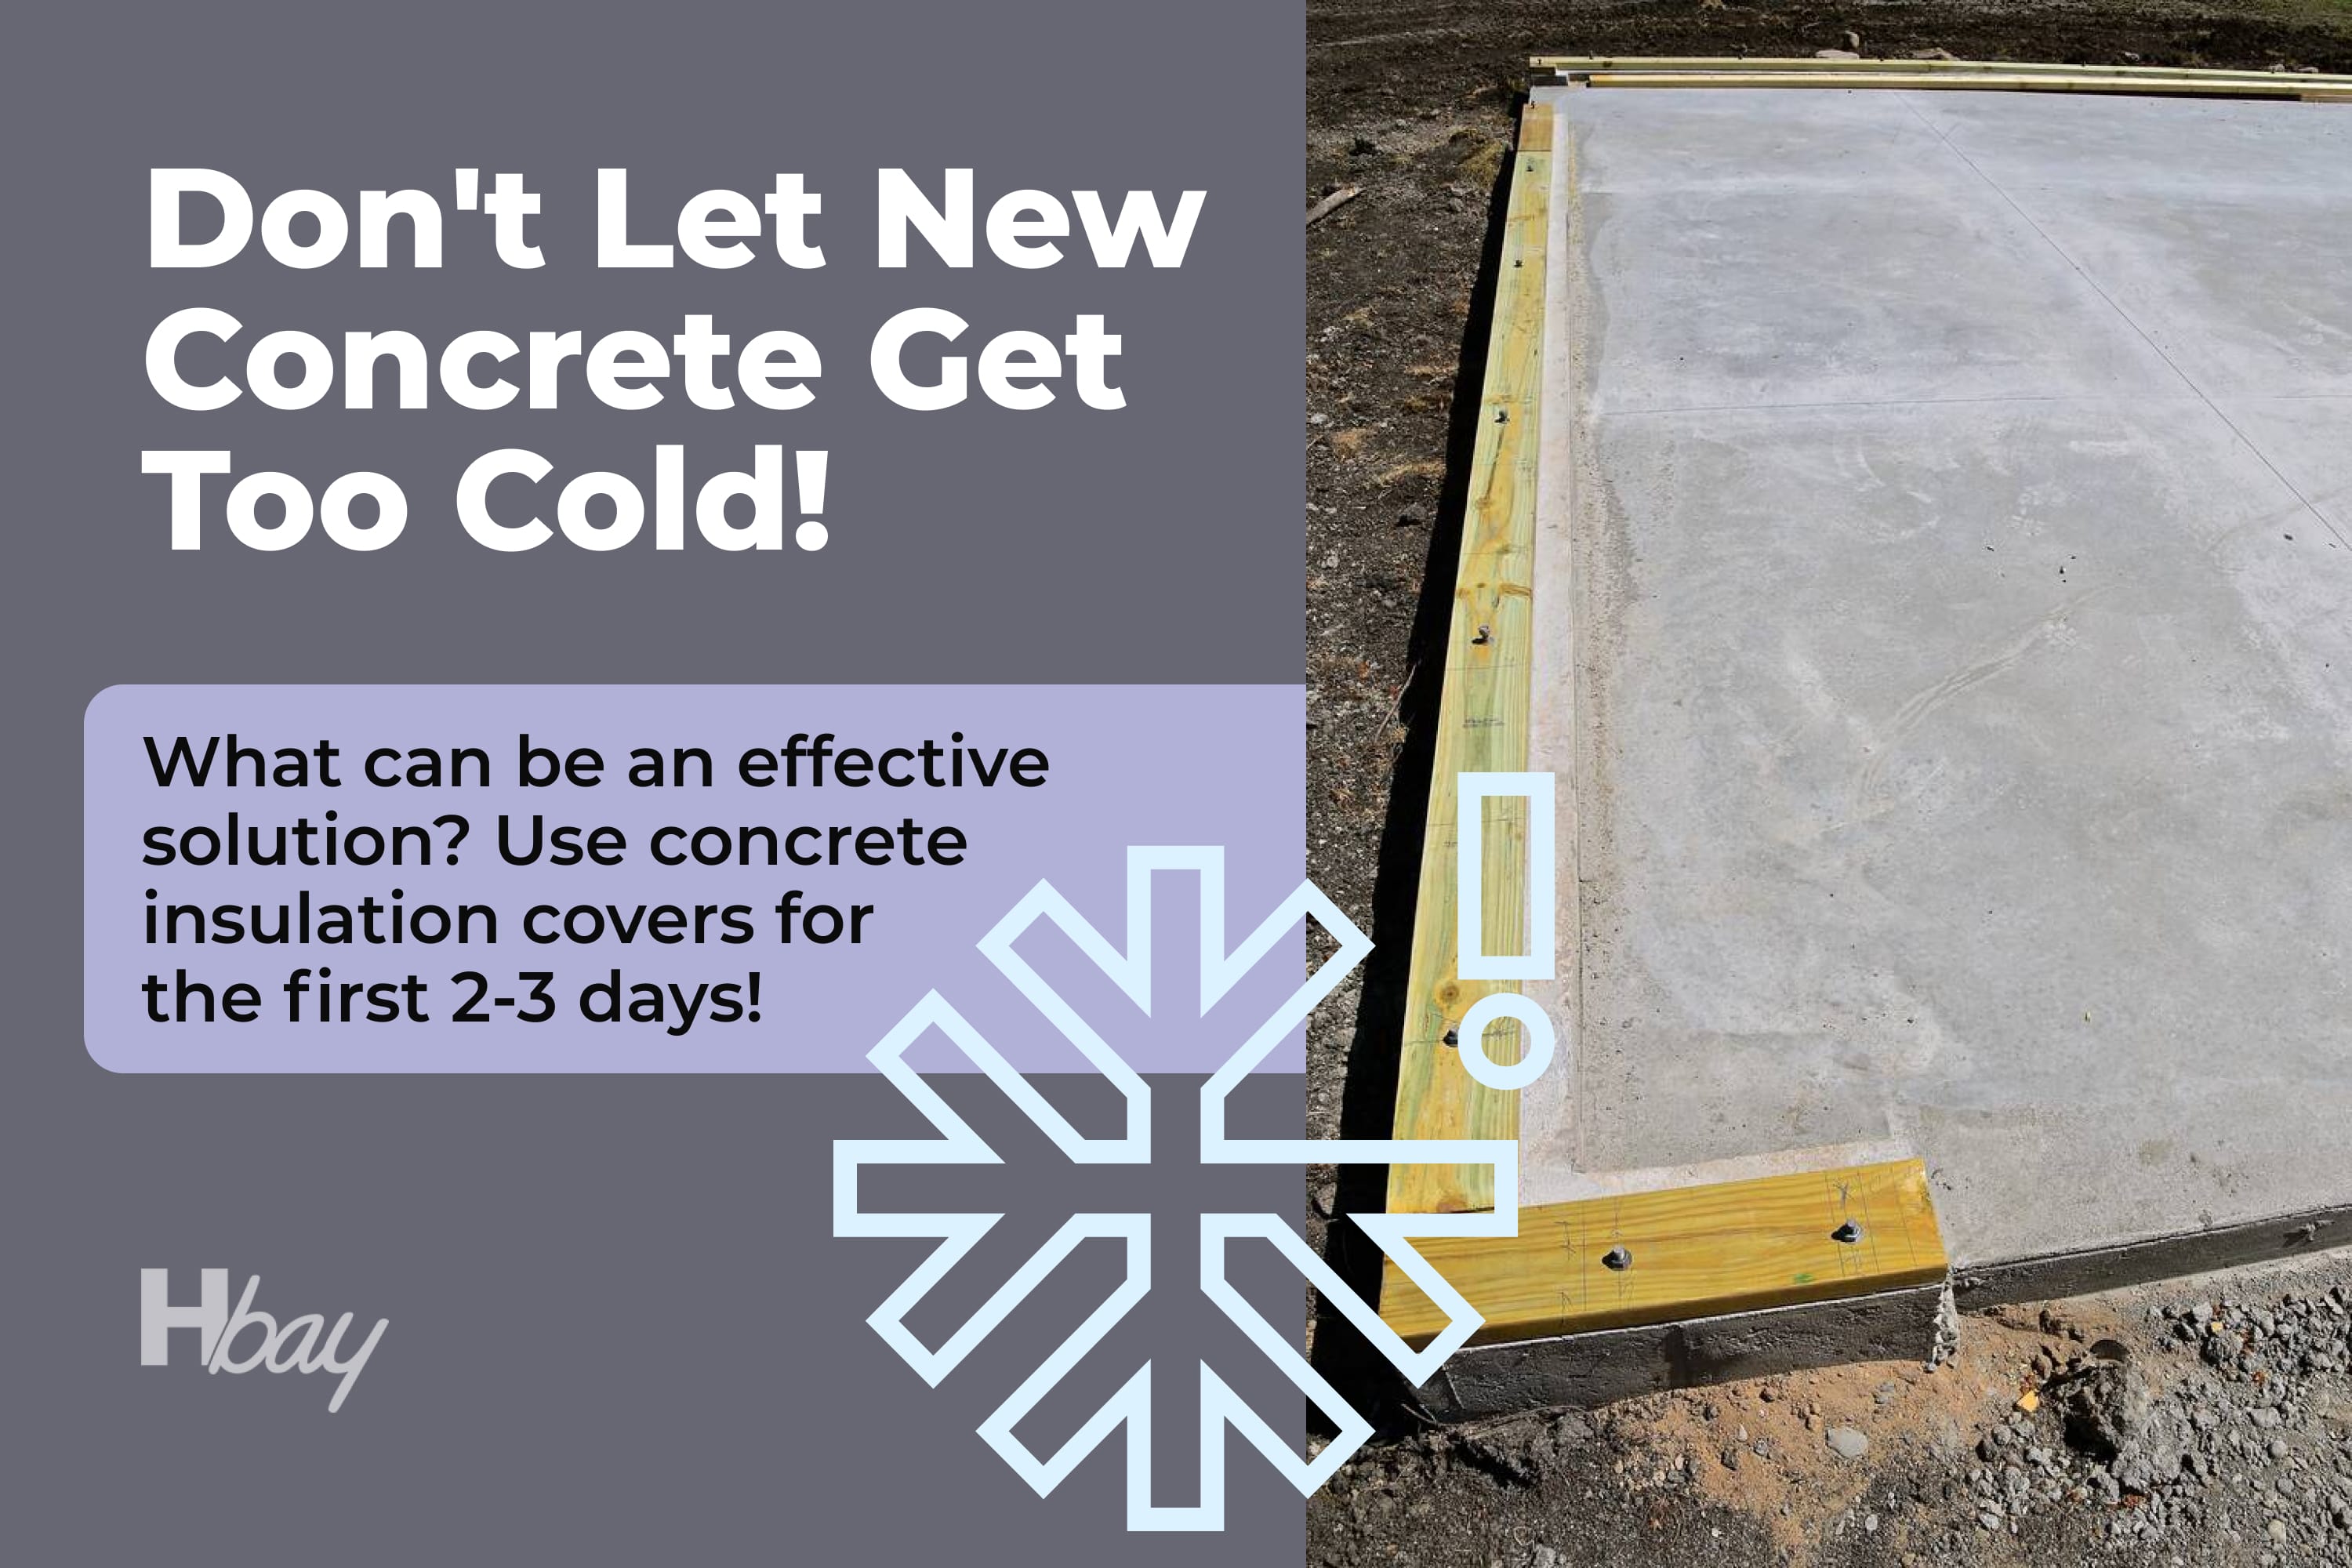 Don’t Let New Concrete Get Too Cold